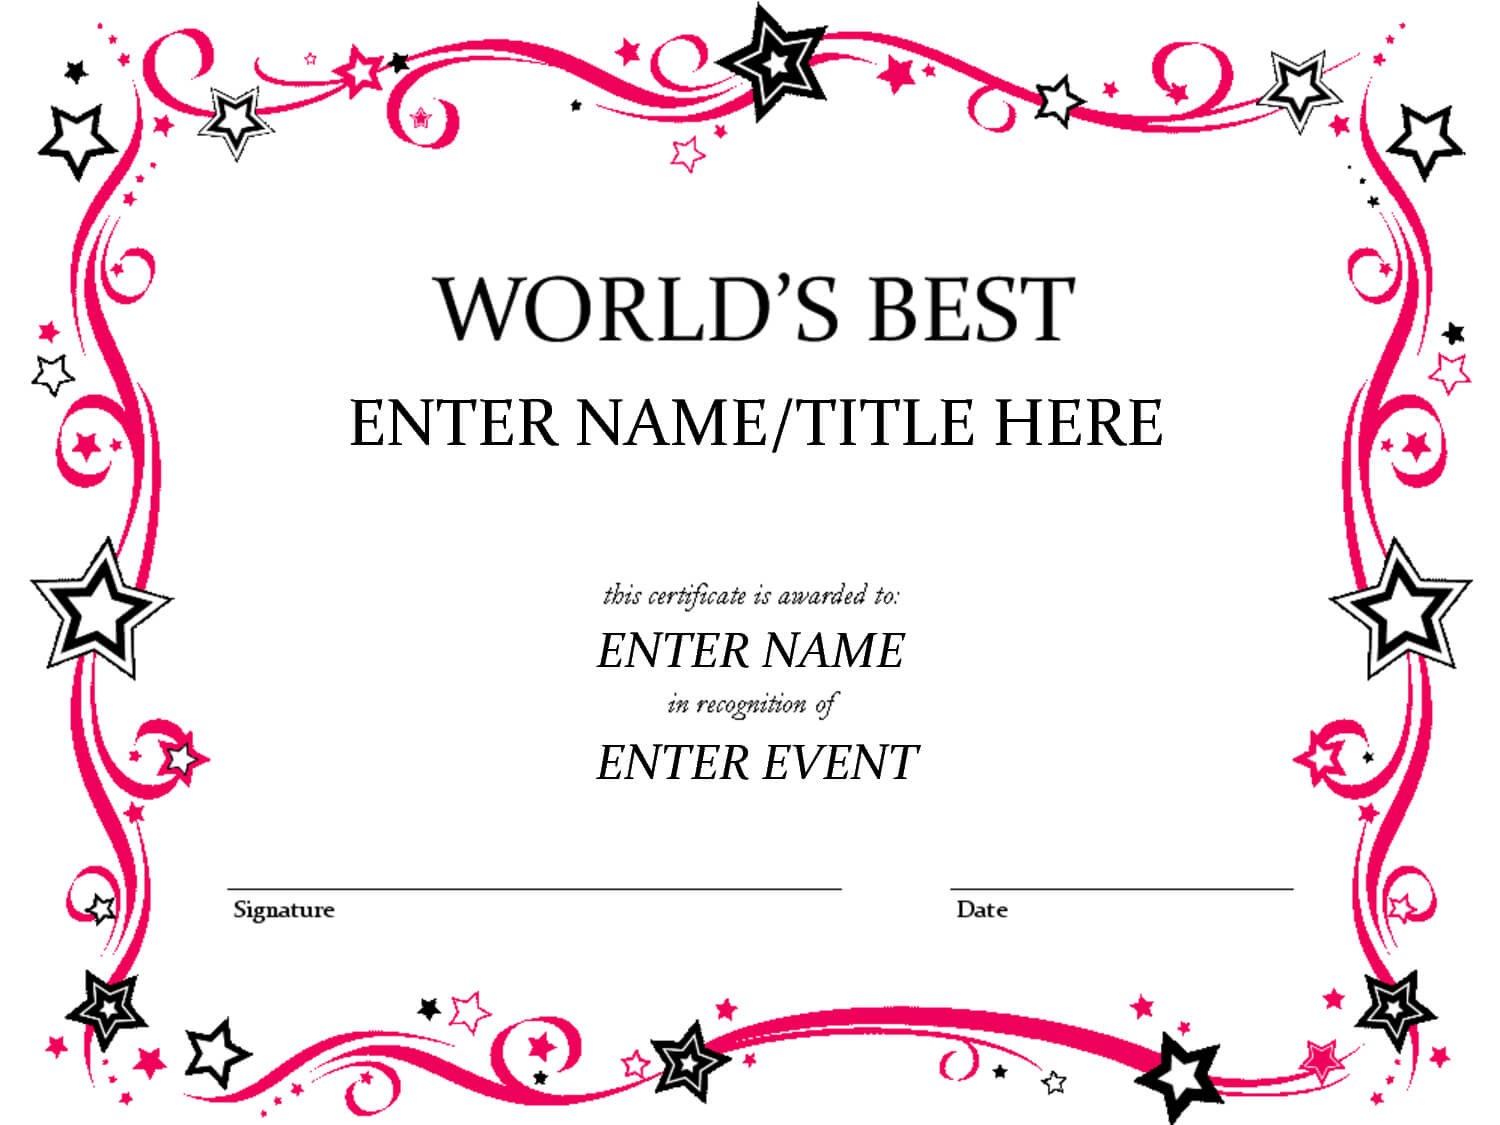 Easy To Use Award Certificate Template Word : V M D Regarding Blank Award Certificate Templates Word